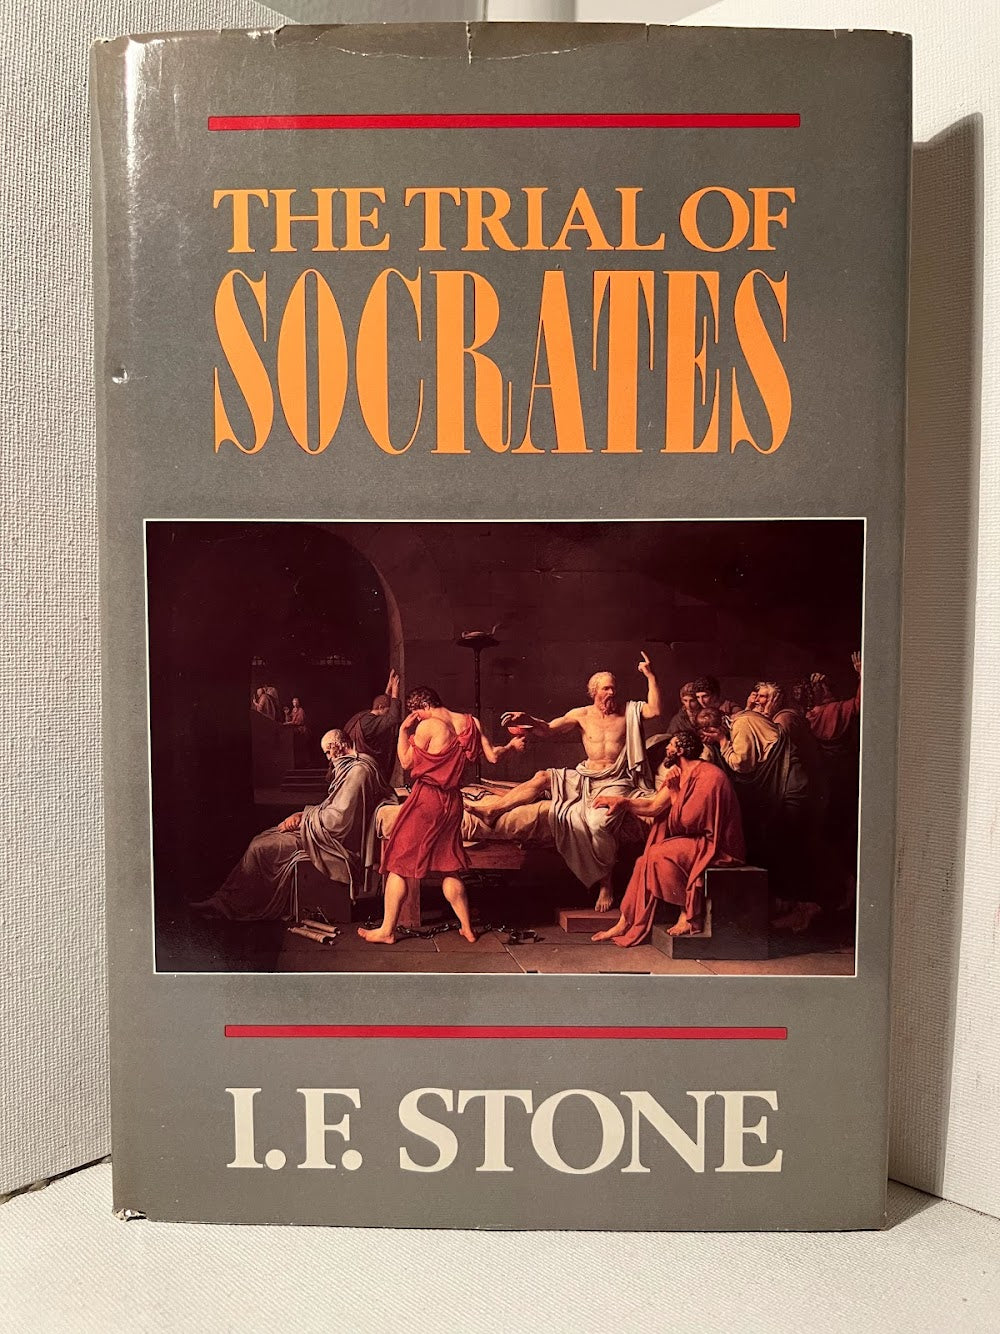 The Trial of Socrates by I.F. Stone